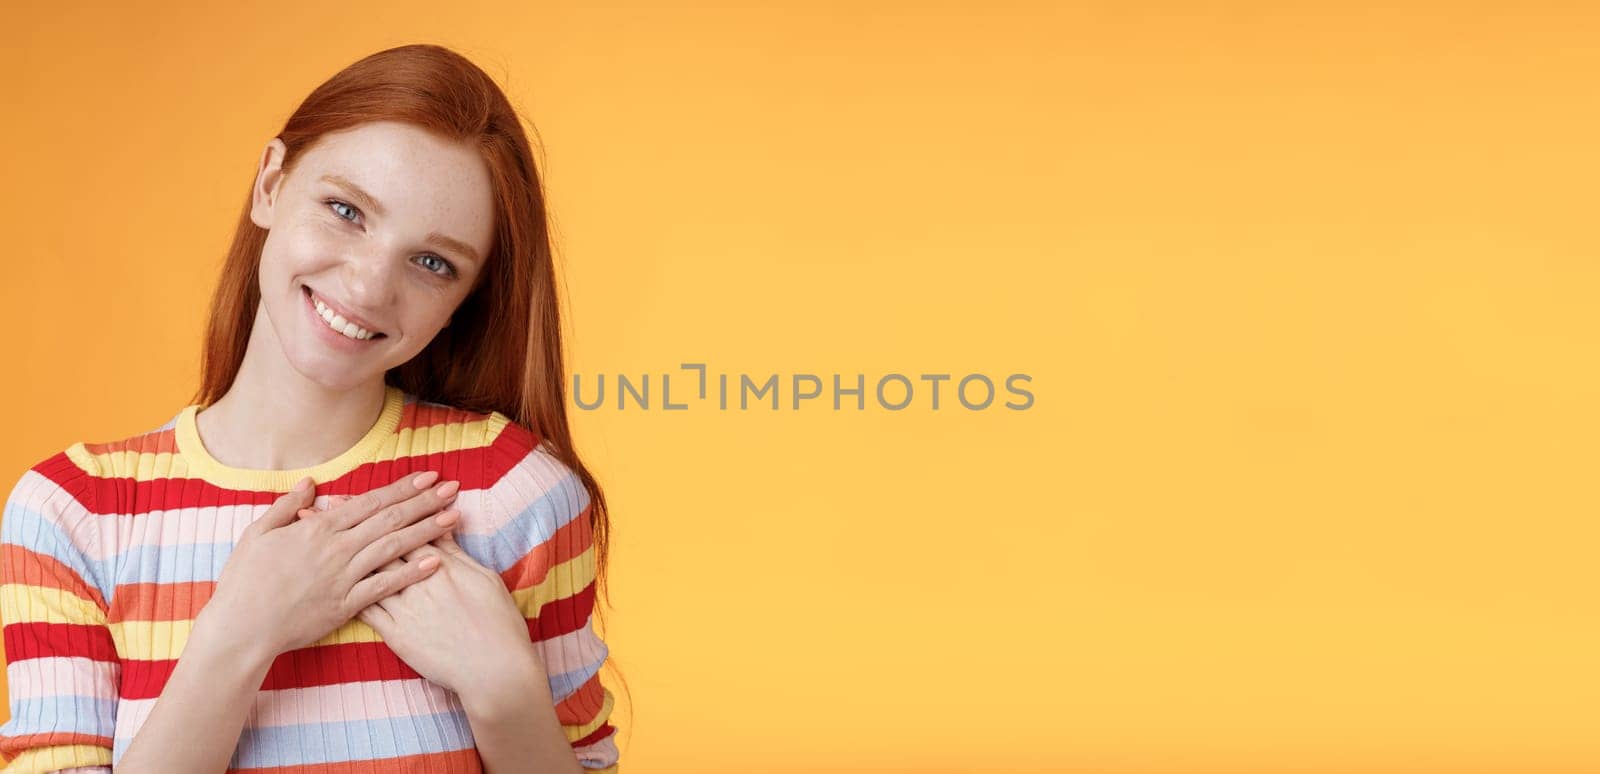 Pleased tender feminine good-looking redhead woman receive compliment confession touch heart feel warmth dearest moment smiling delighted lovely keep love inside soul, standing orange background.